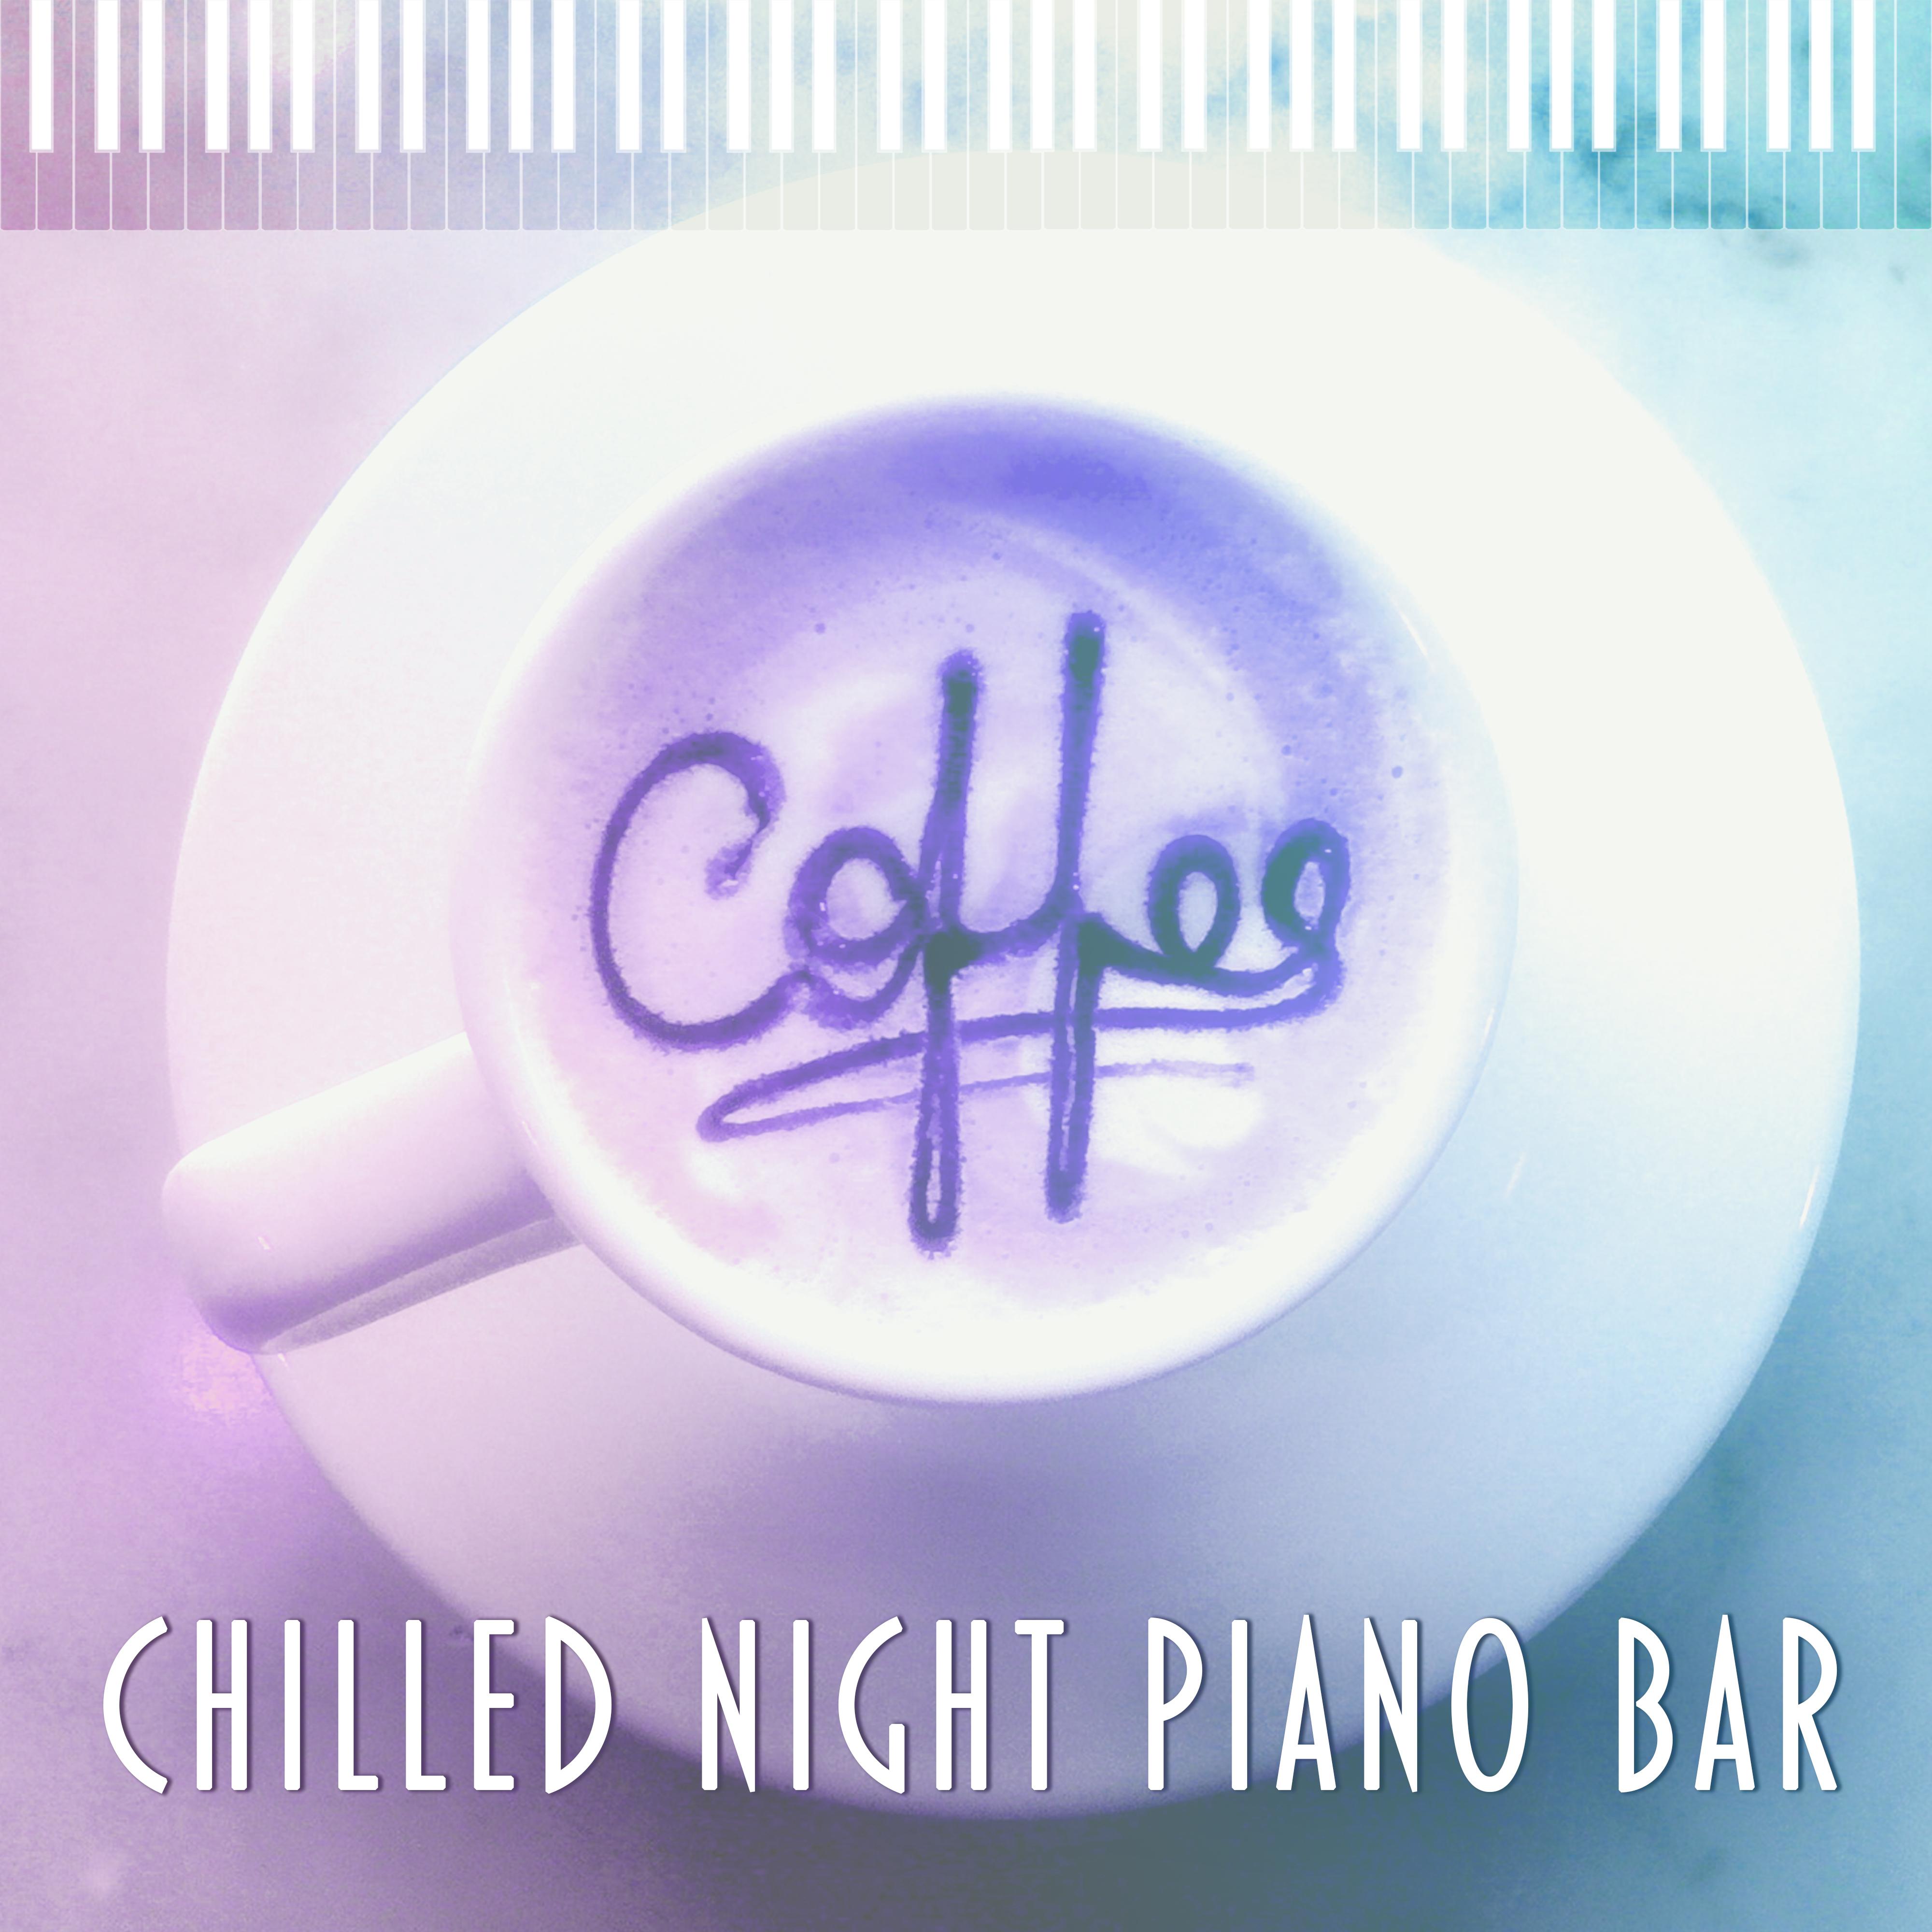 Chilled Night Piano Bar  Chilled Jazz, Jazz Fest, Smooth Piano, Relaxing Music